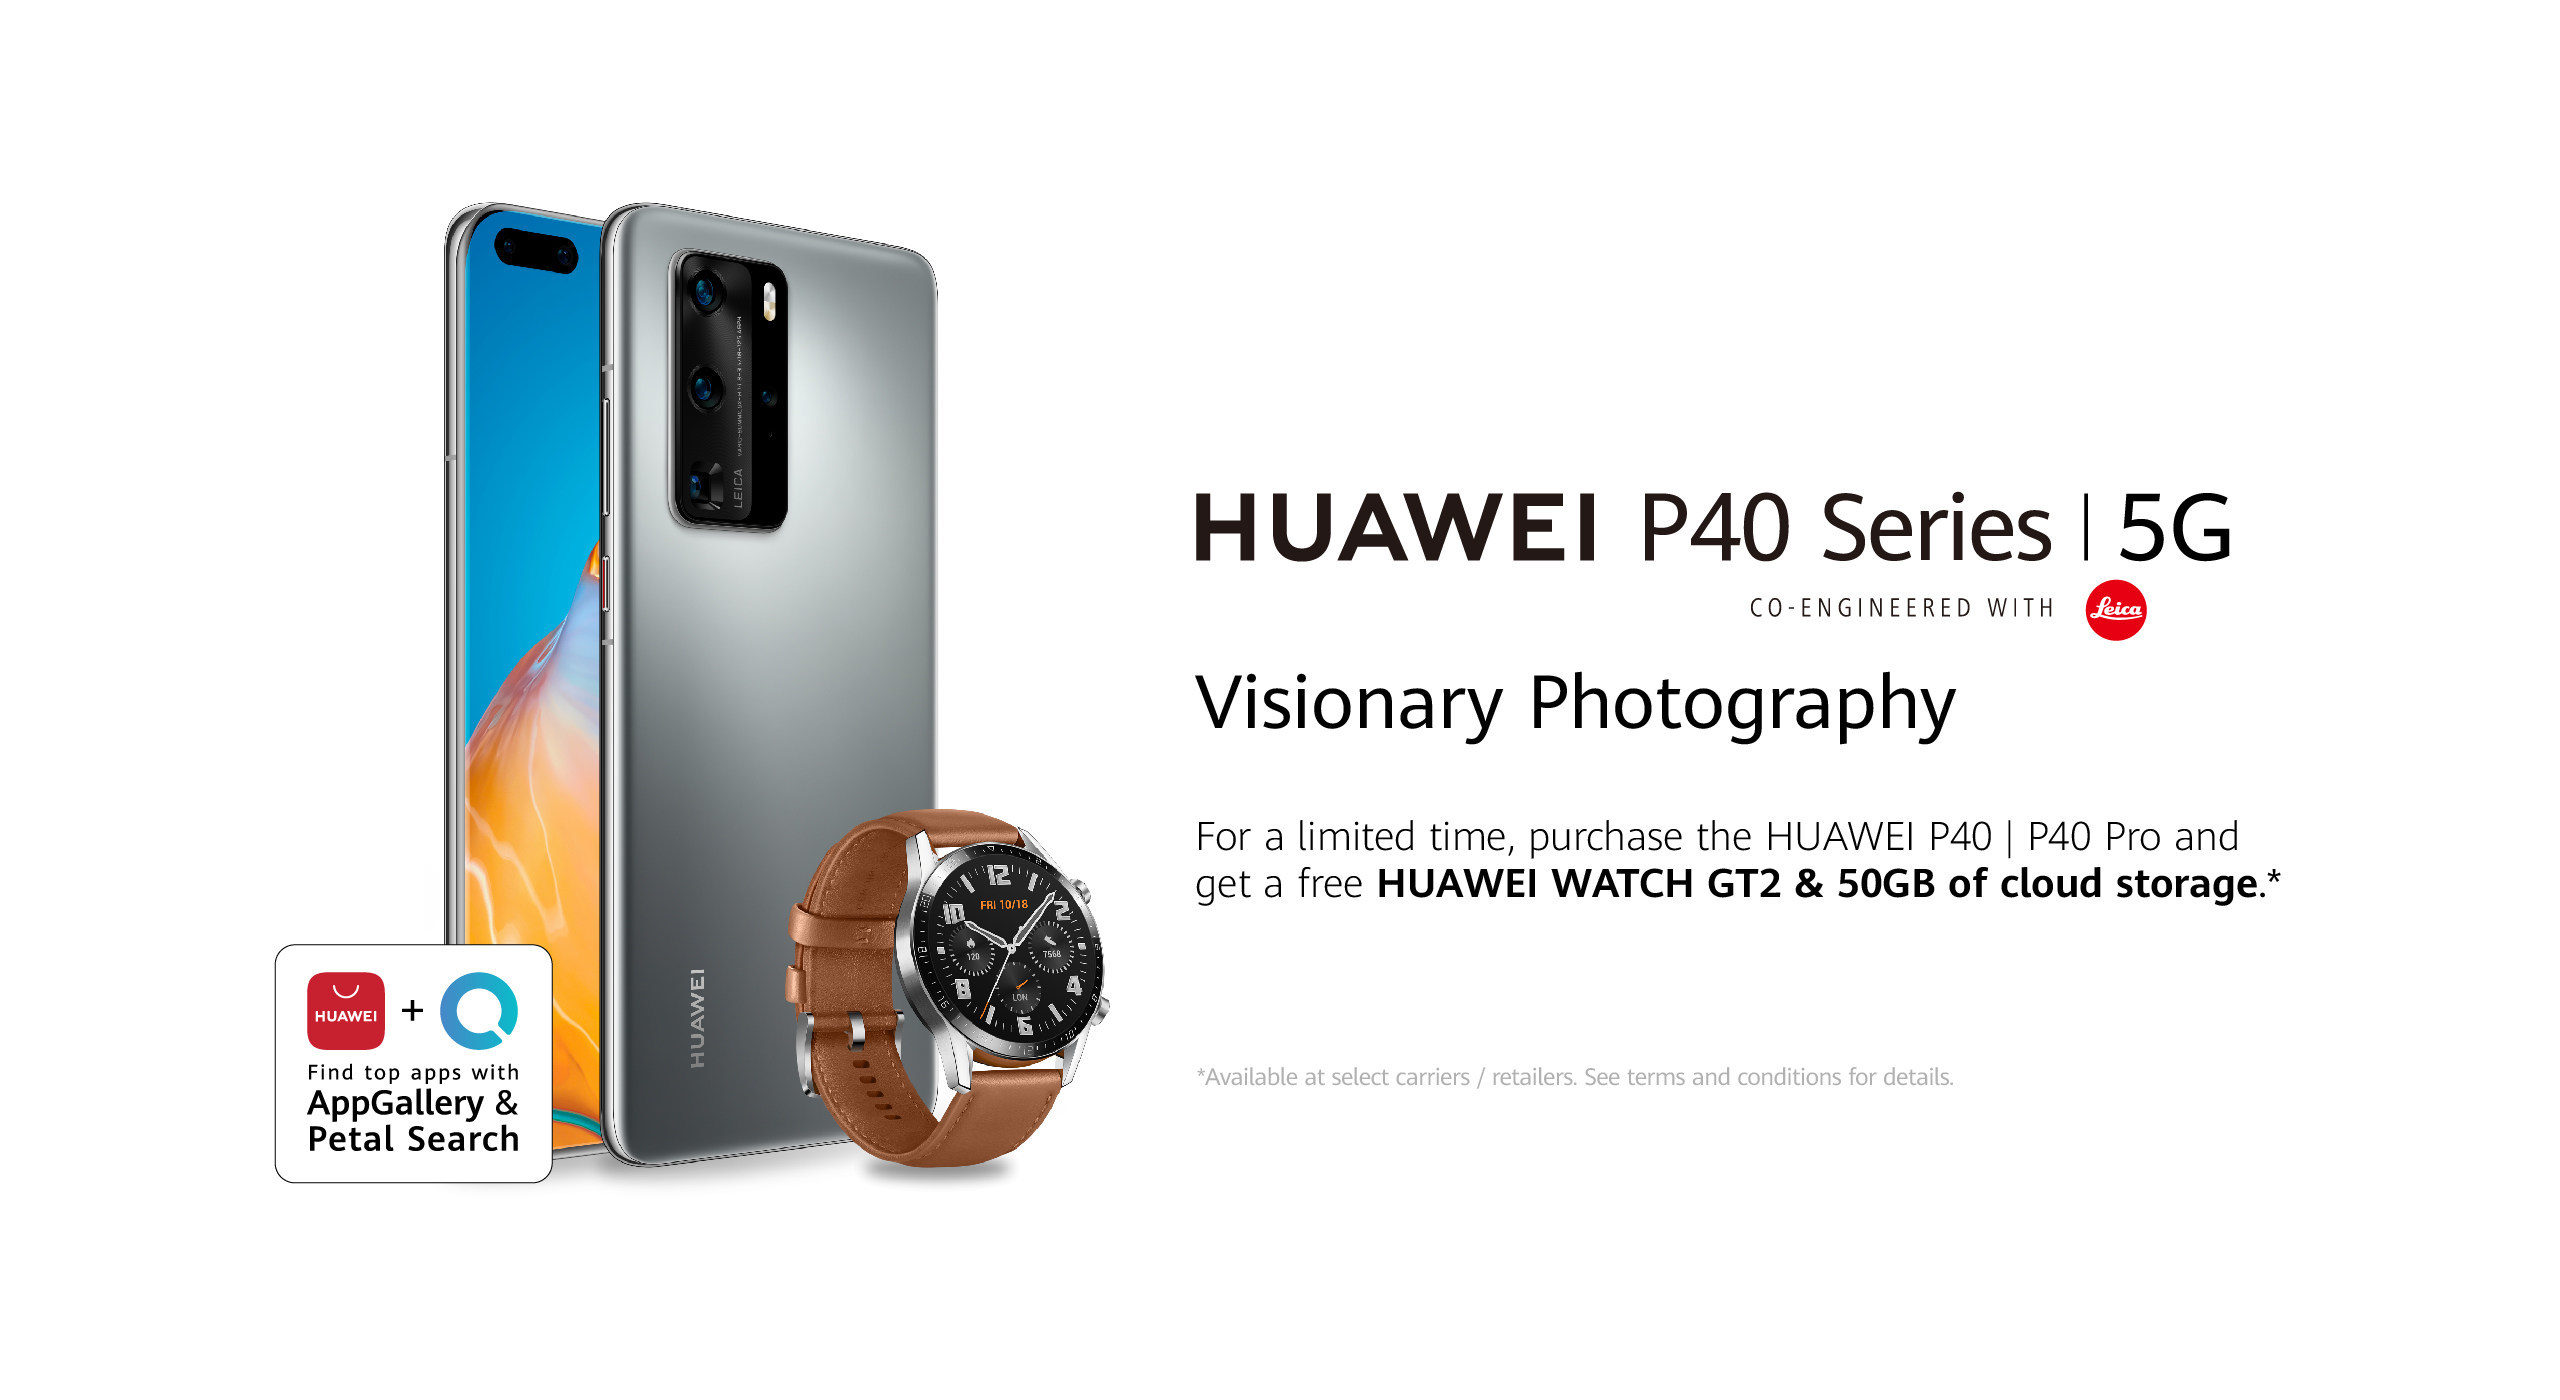 Huawei P40 Series 5g With World S Best Smartphone Camera And The New Huawei Appgallery And Petal Search Now Available In Canada - bisexual power crop top 3 roblox amino